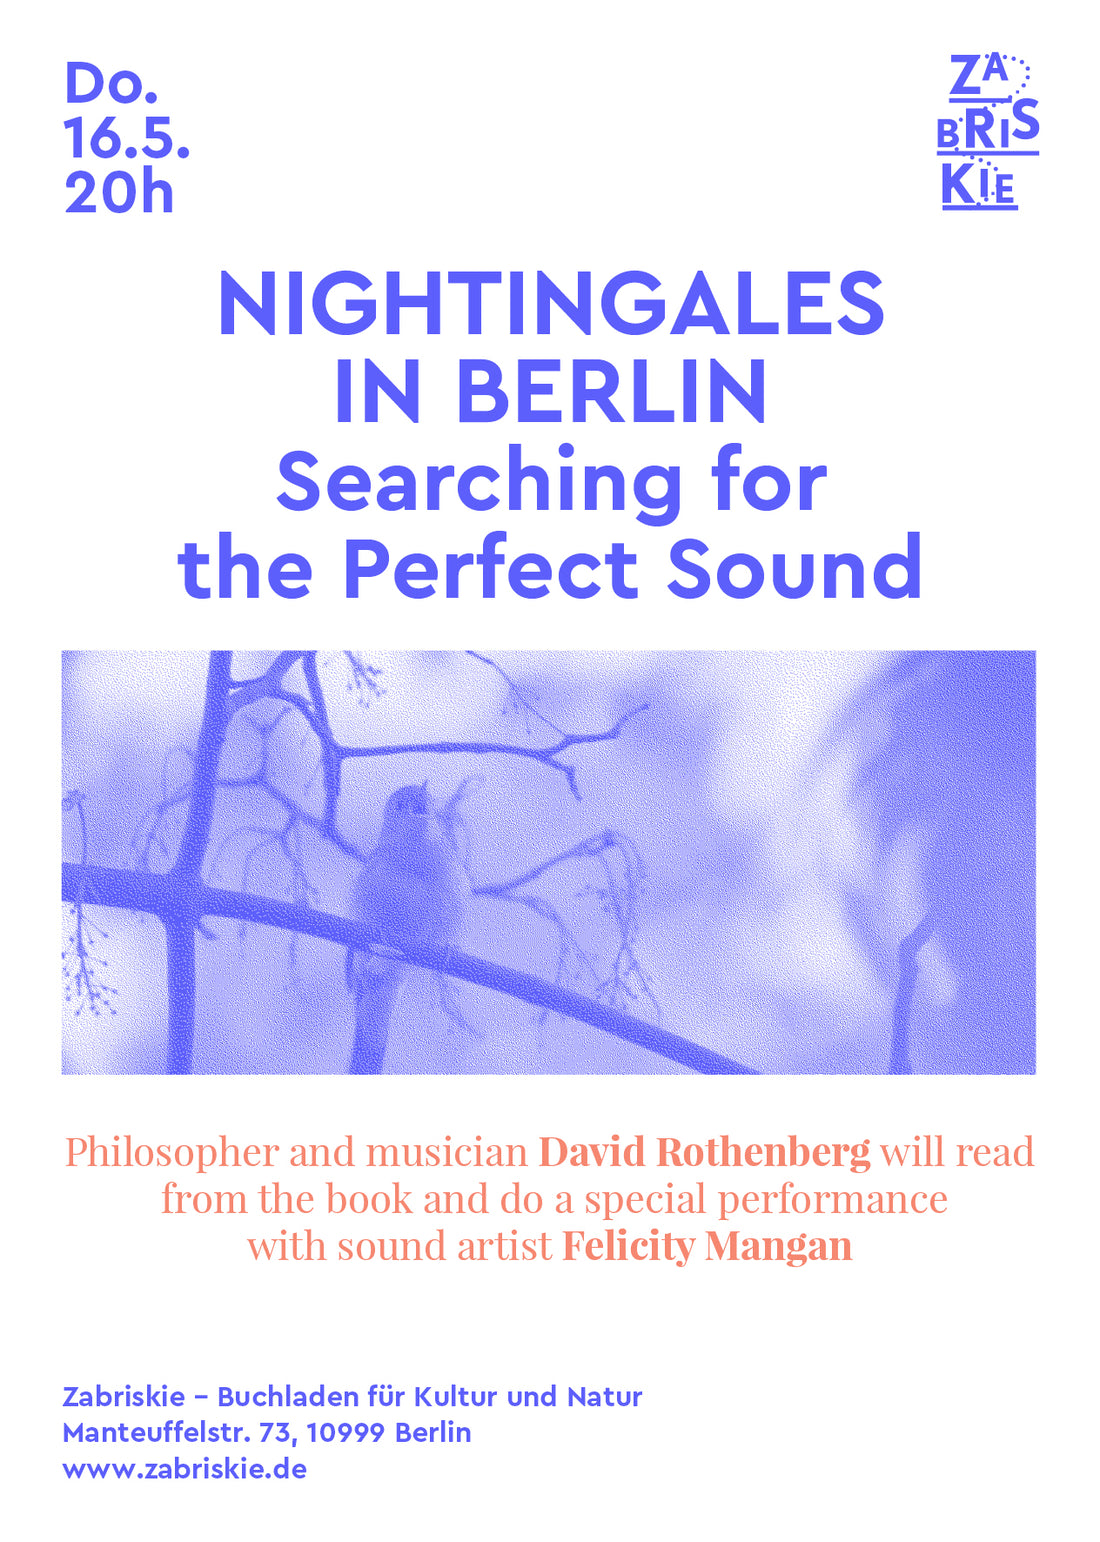 Nightingales in Berlin: Searching for  the Perfect Sound - Reading and Performance with David Rothenberg and Felicity Mangan